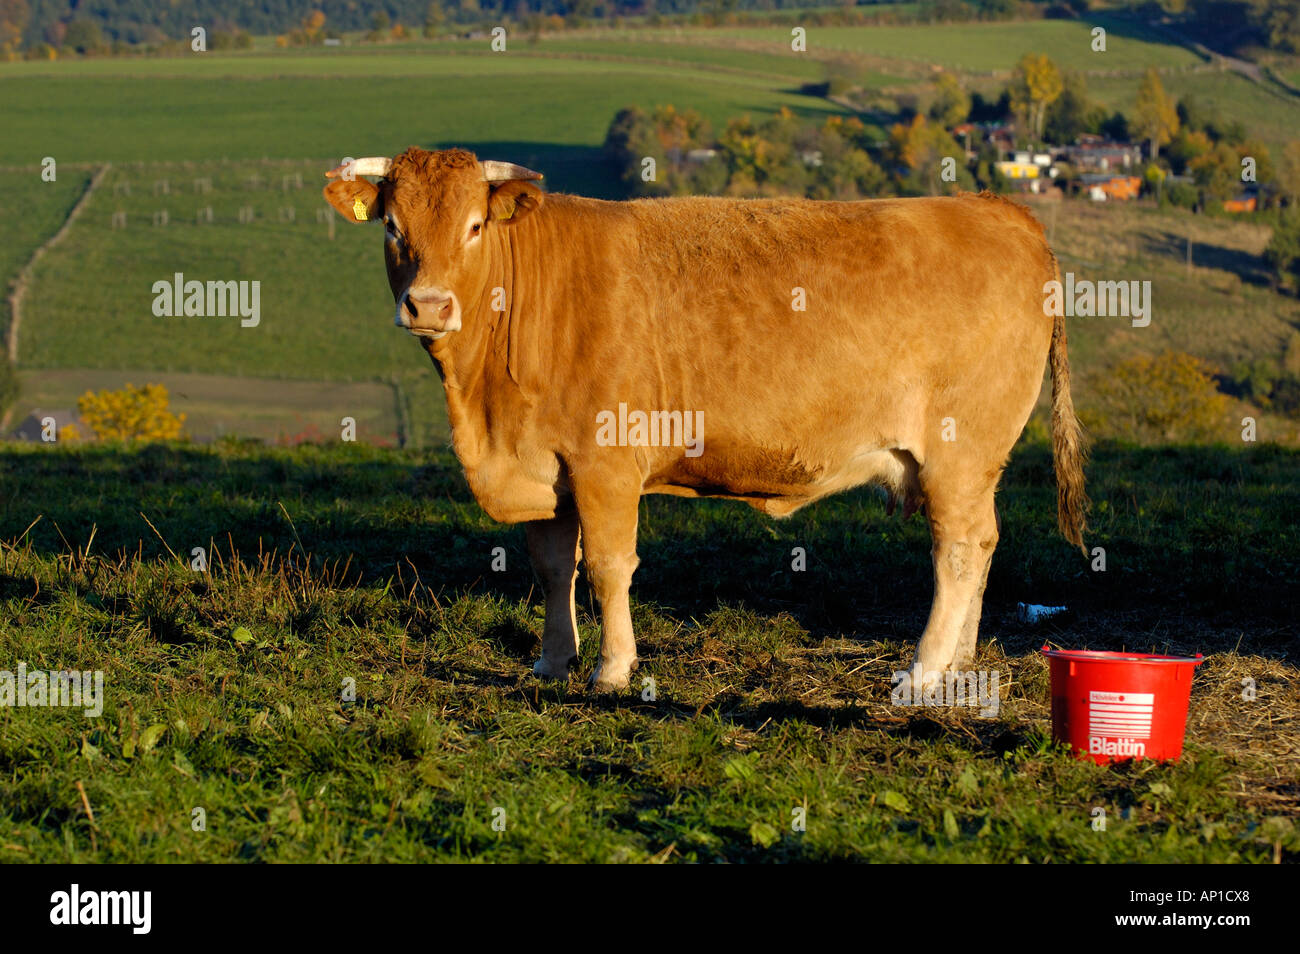 Limousin cow standing in field Stock Photo